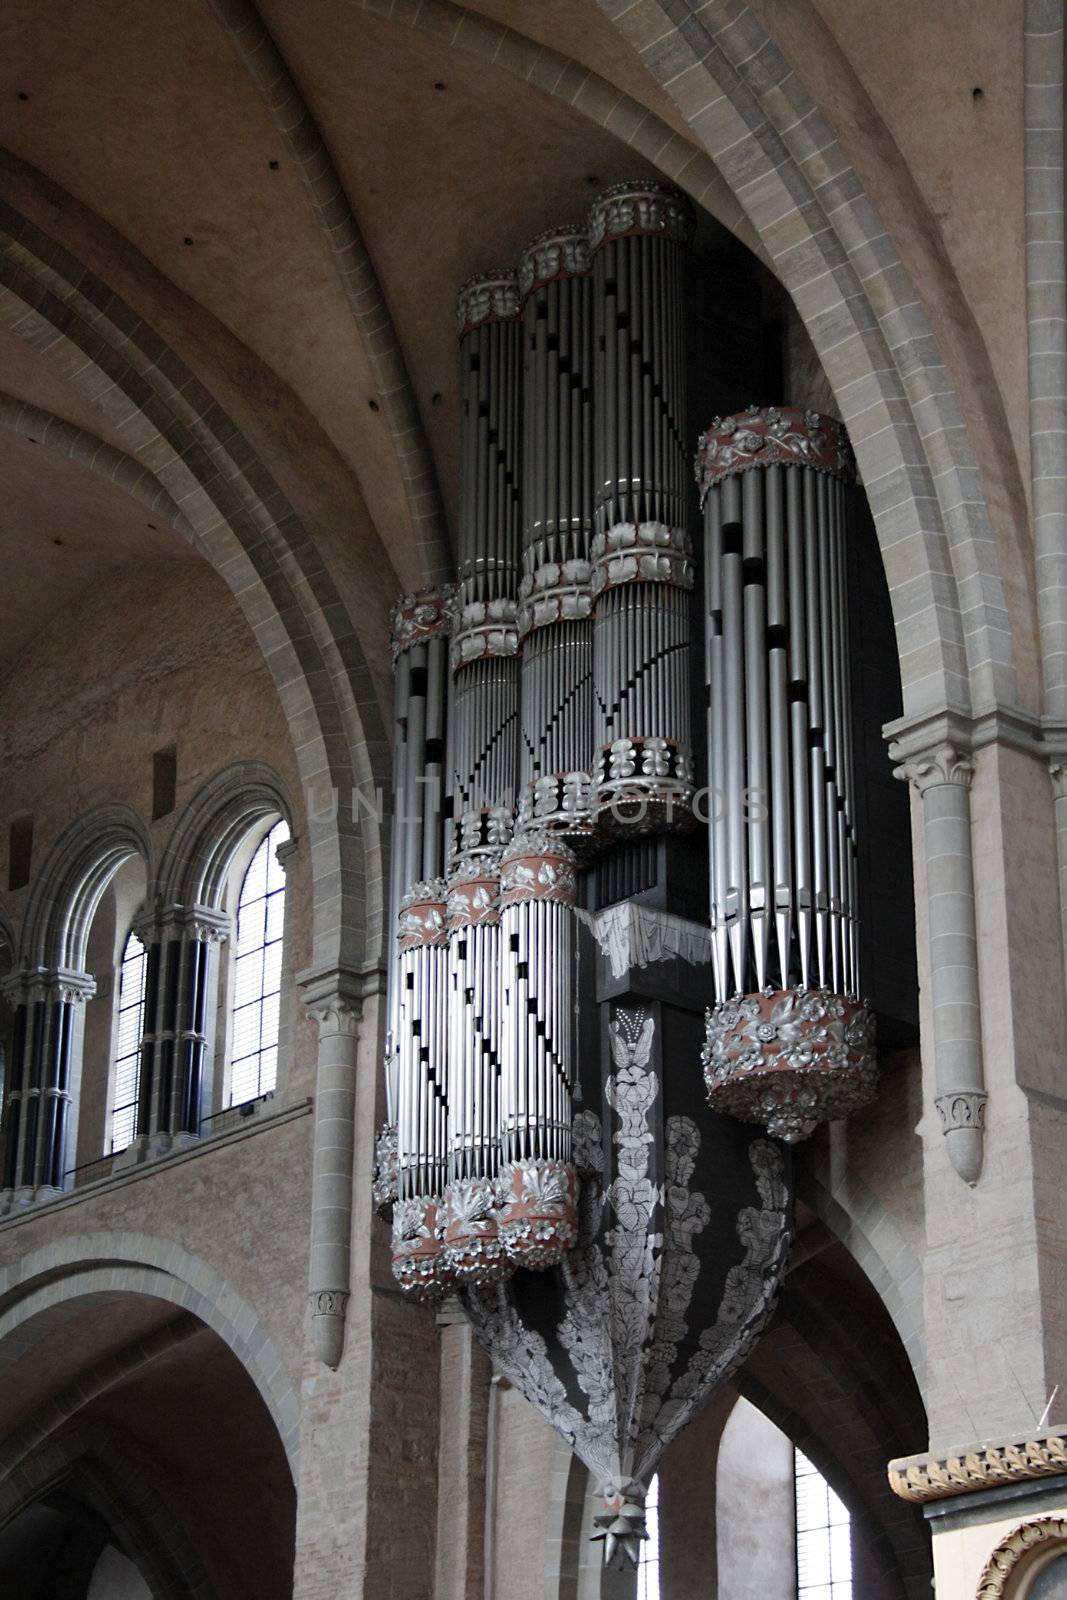 The pipe organ of the Trier Cathedral, Rhineland-Palatinate, Germany.